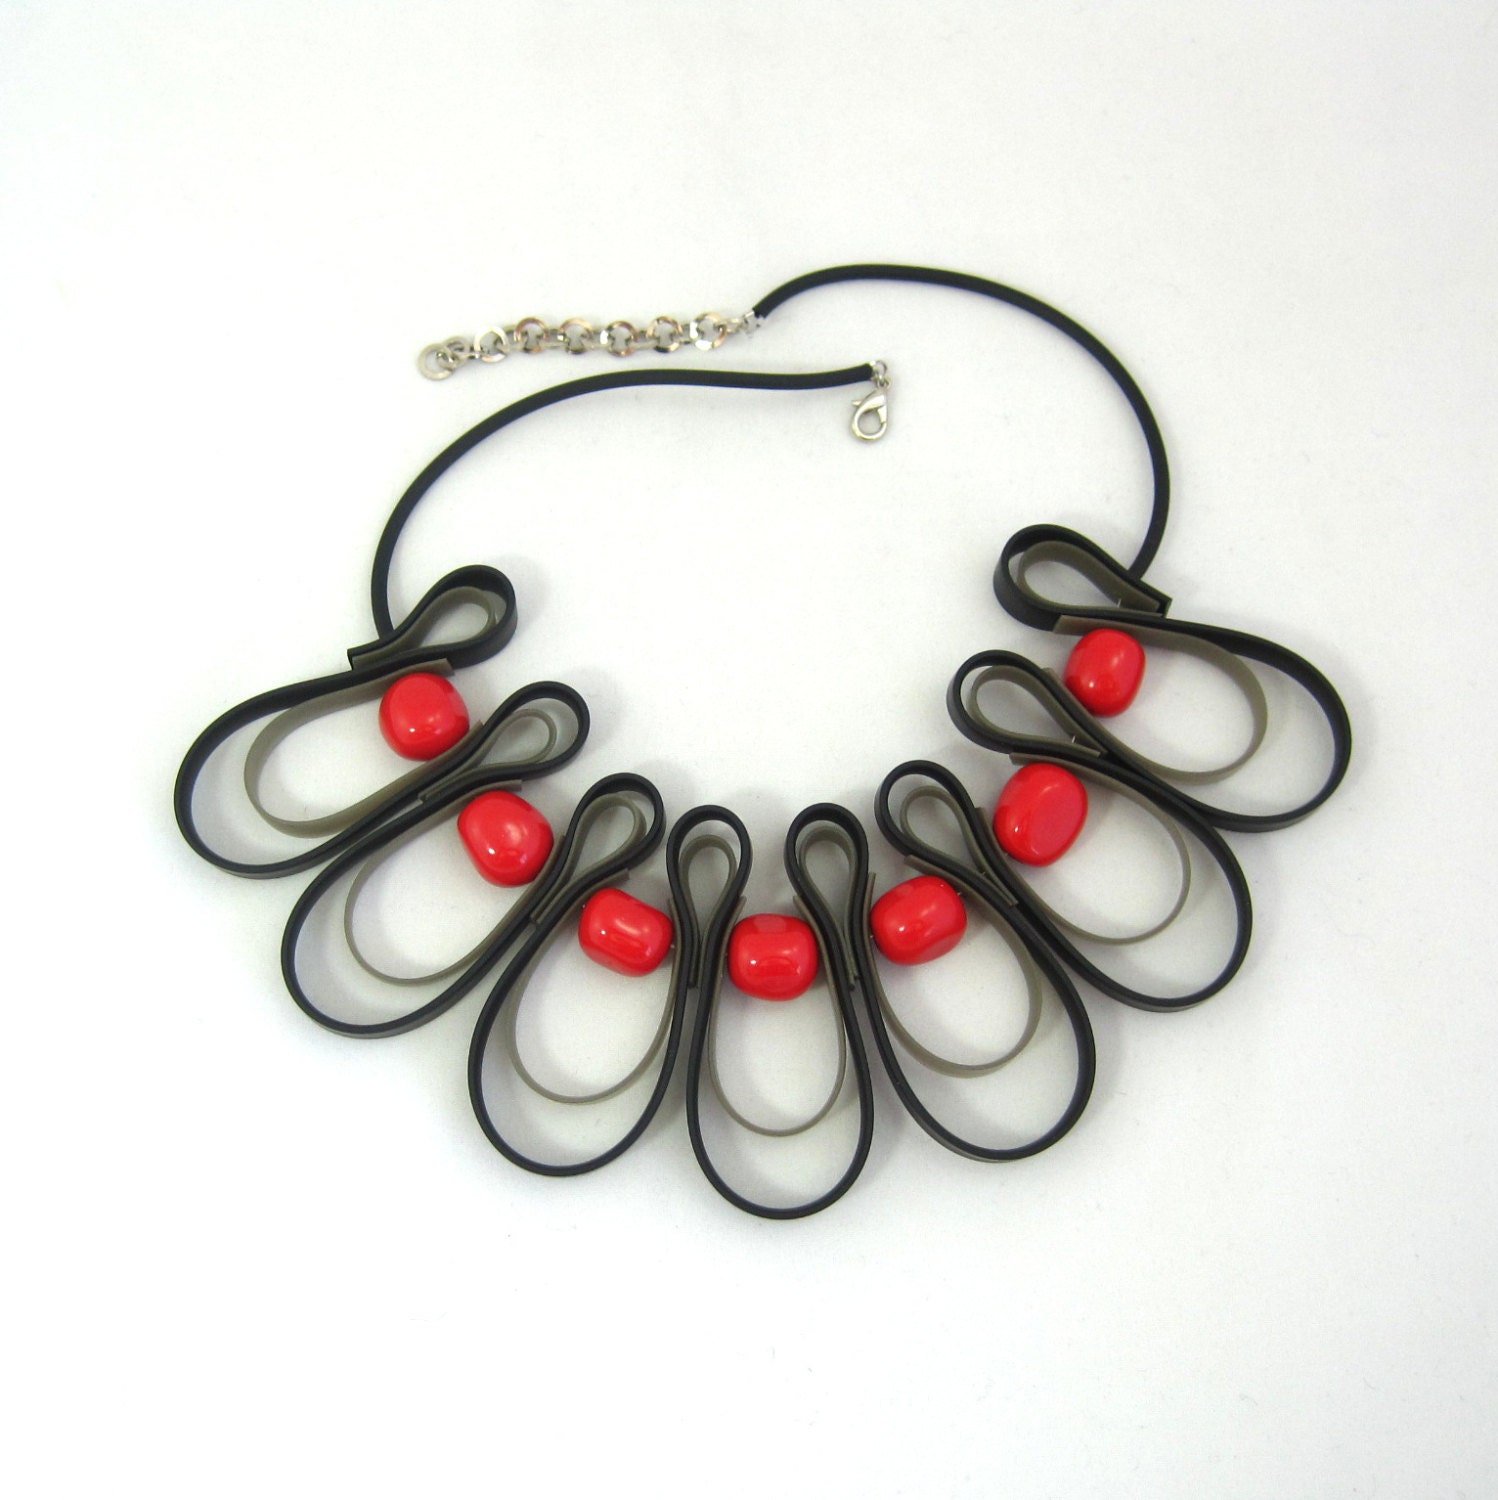 red and black bib necklace rubber jewelry by frankideas on Etsy